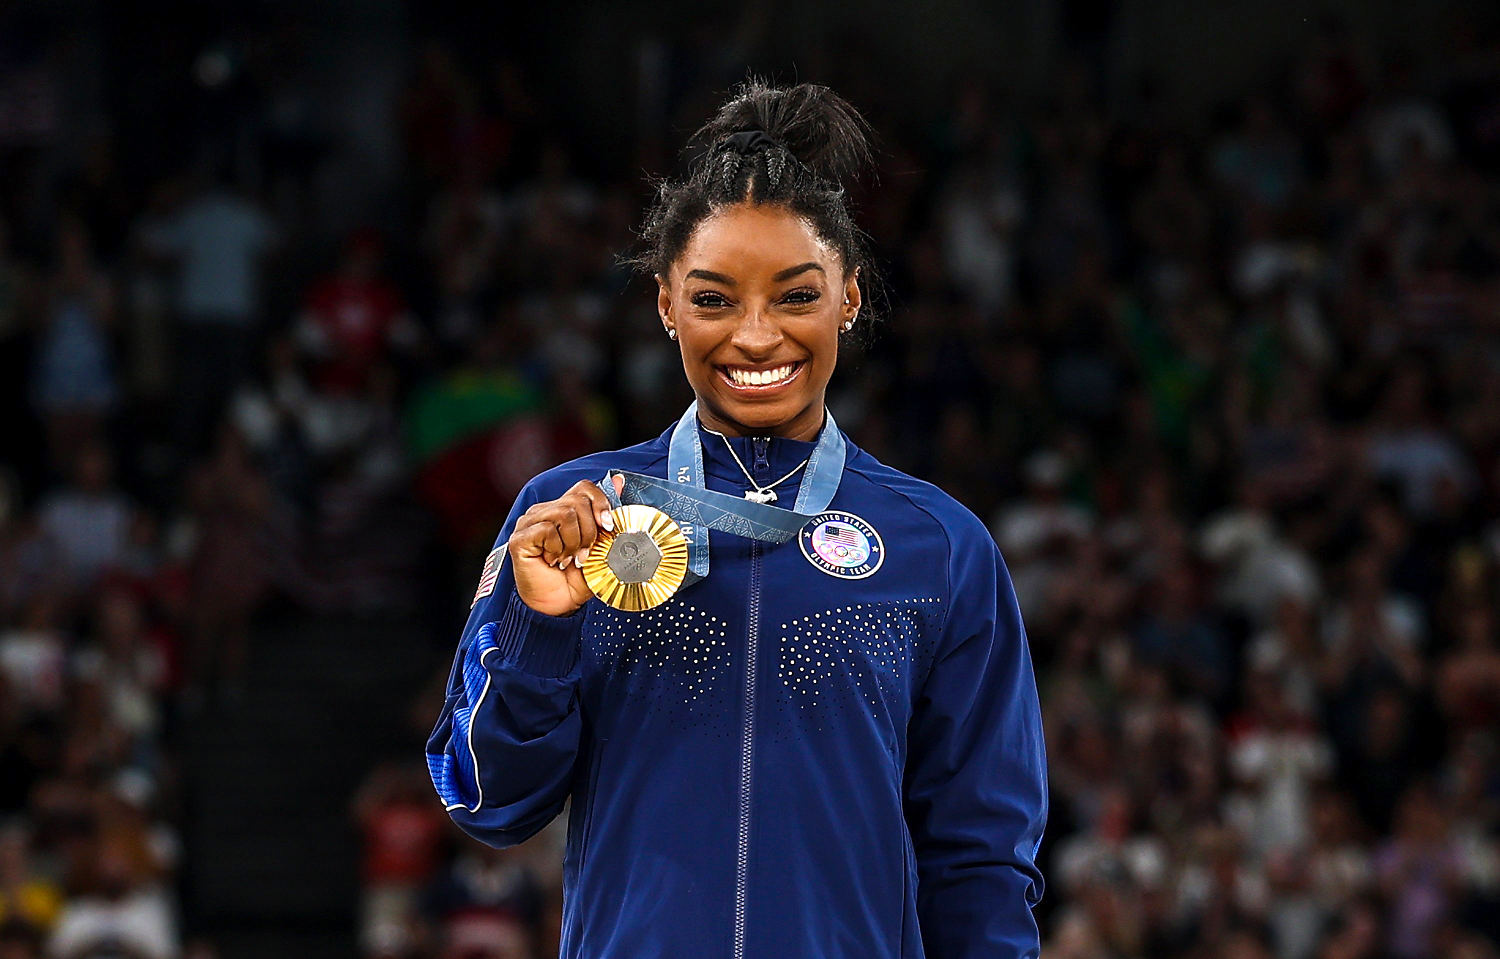 Simone Biles wins gold in the Olympics all-around final